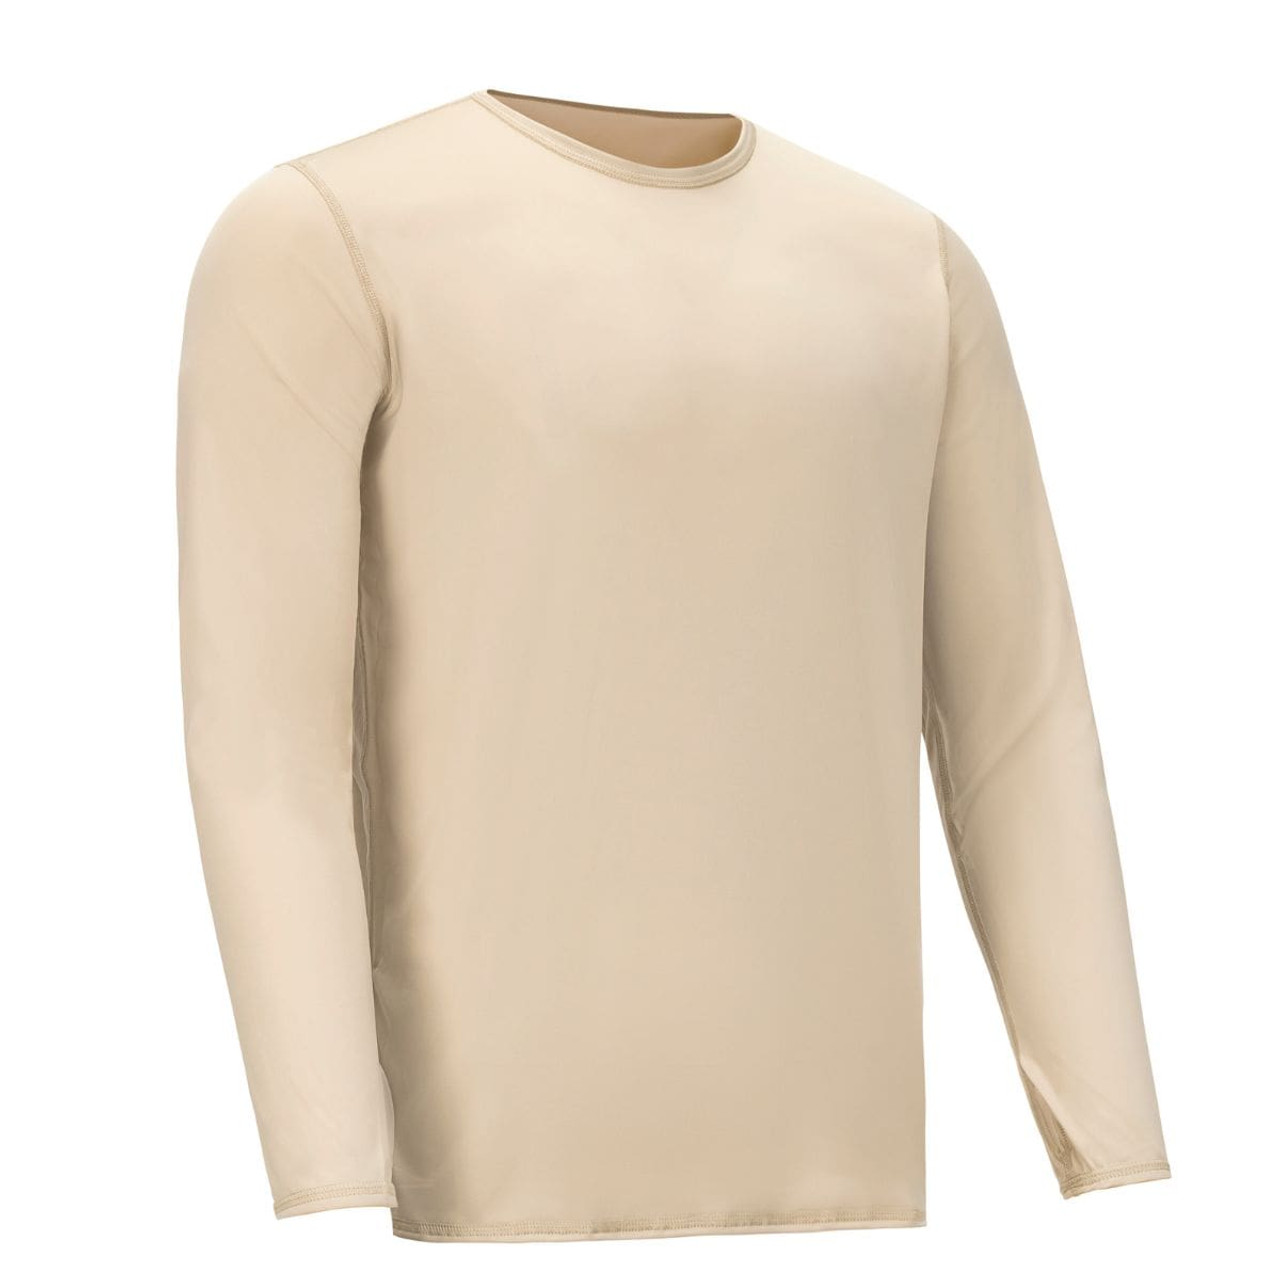 Polartec Silk Weight Thermal Top U.S. Made Military Issue